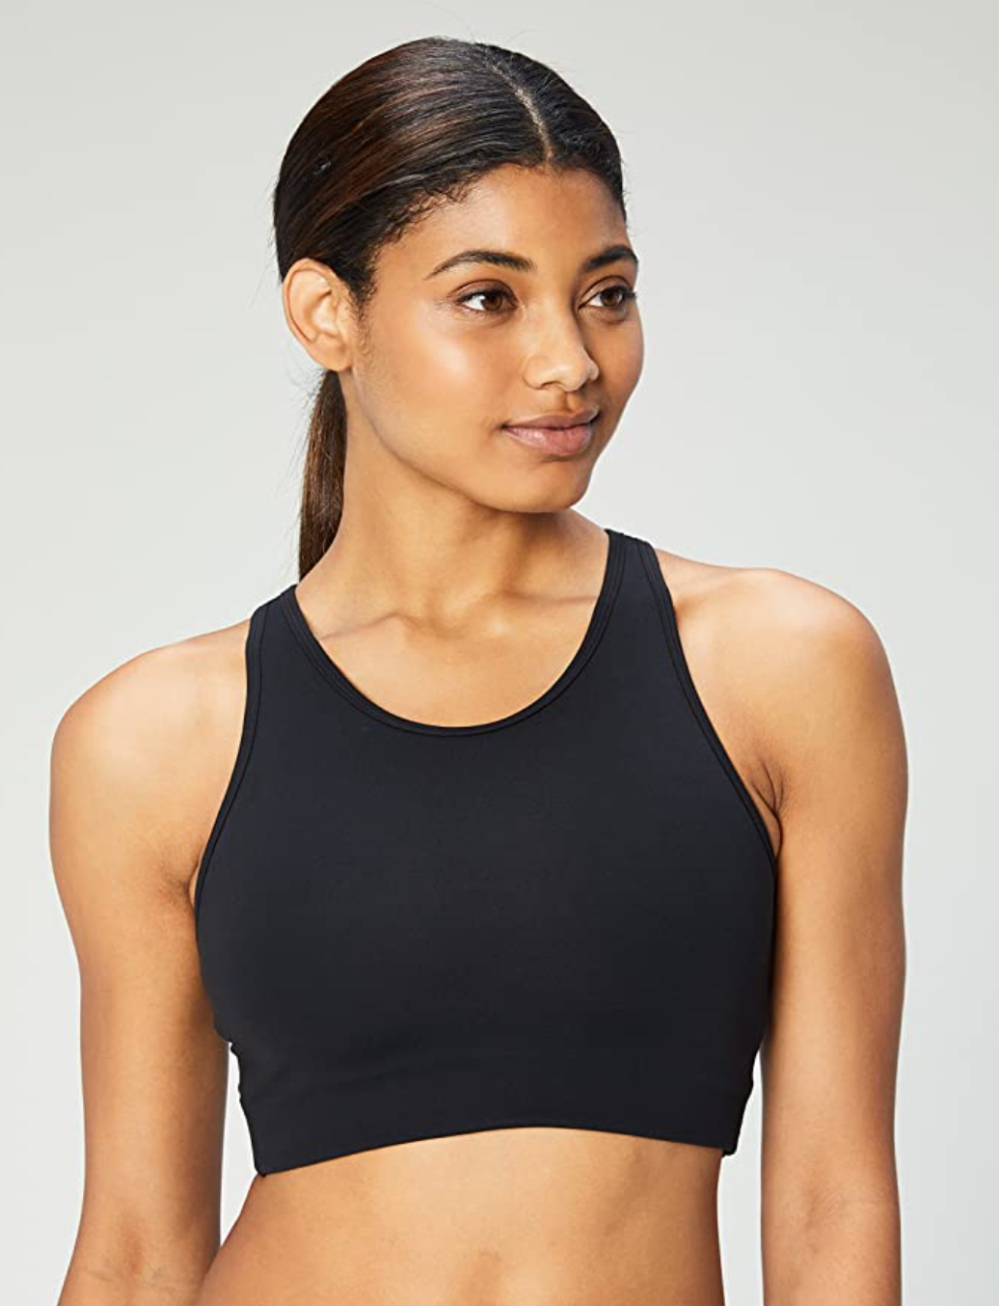 Bra fitting expert: How to choose the perfect sports bra for you - 9Coach